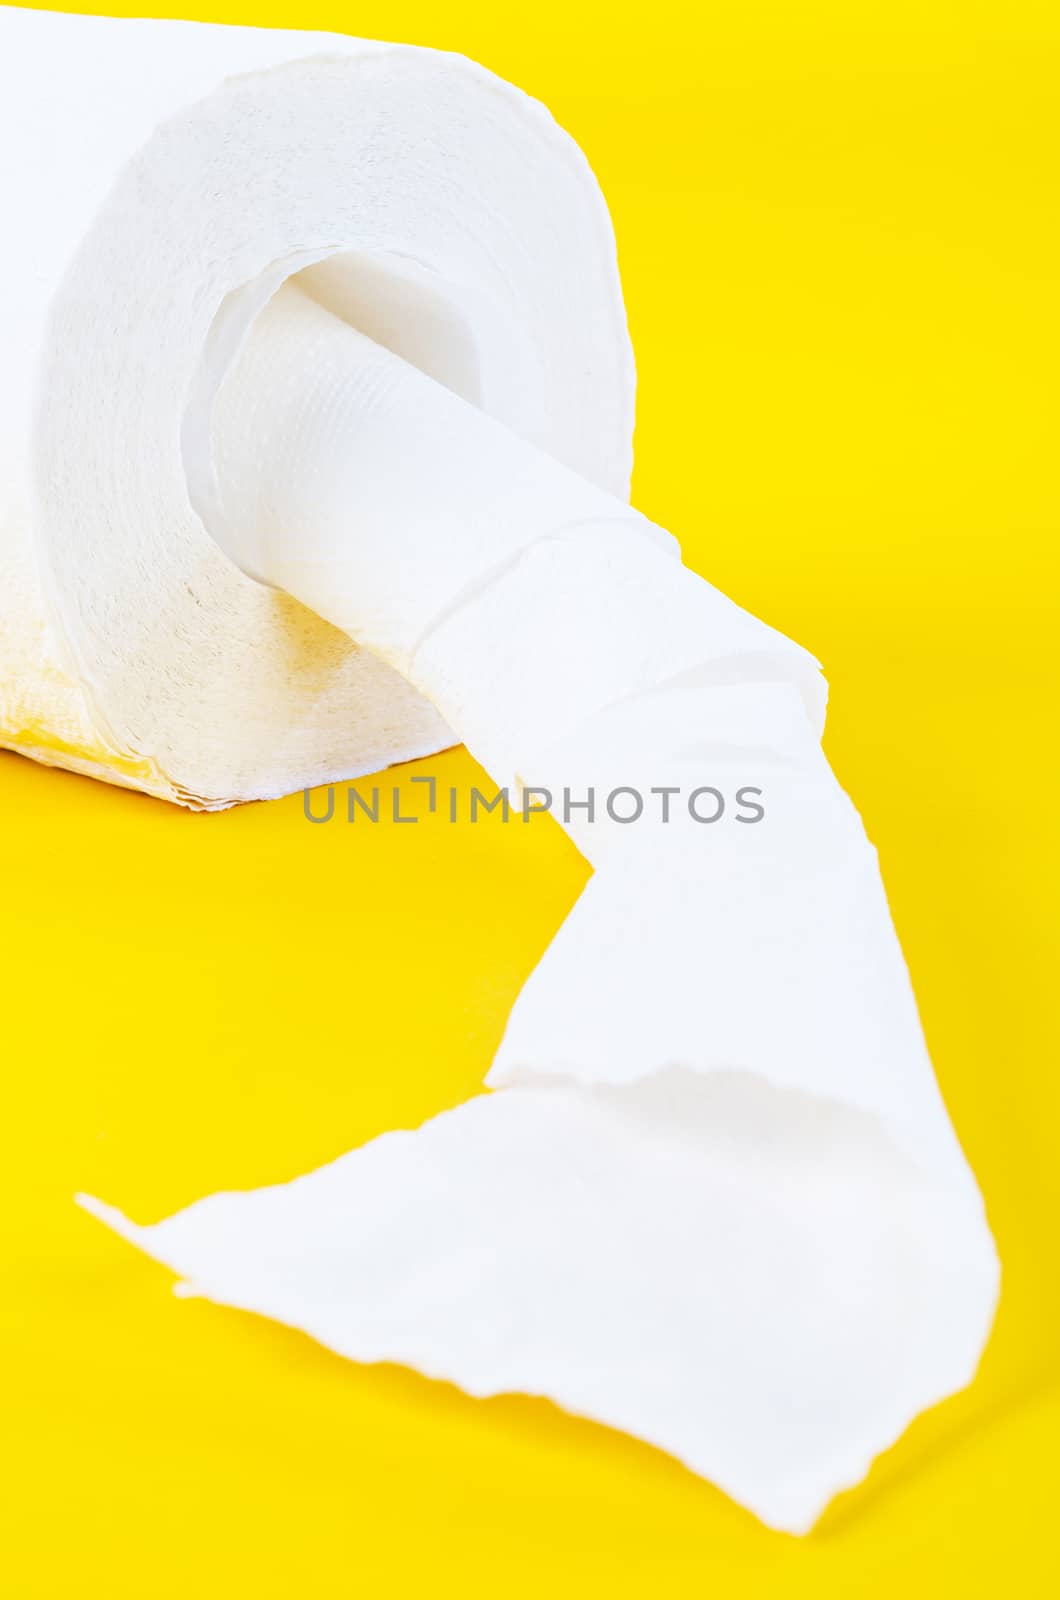 Tissue paper rolls on the yellow background.